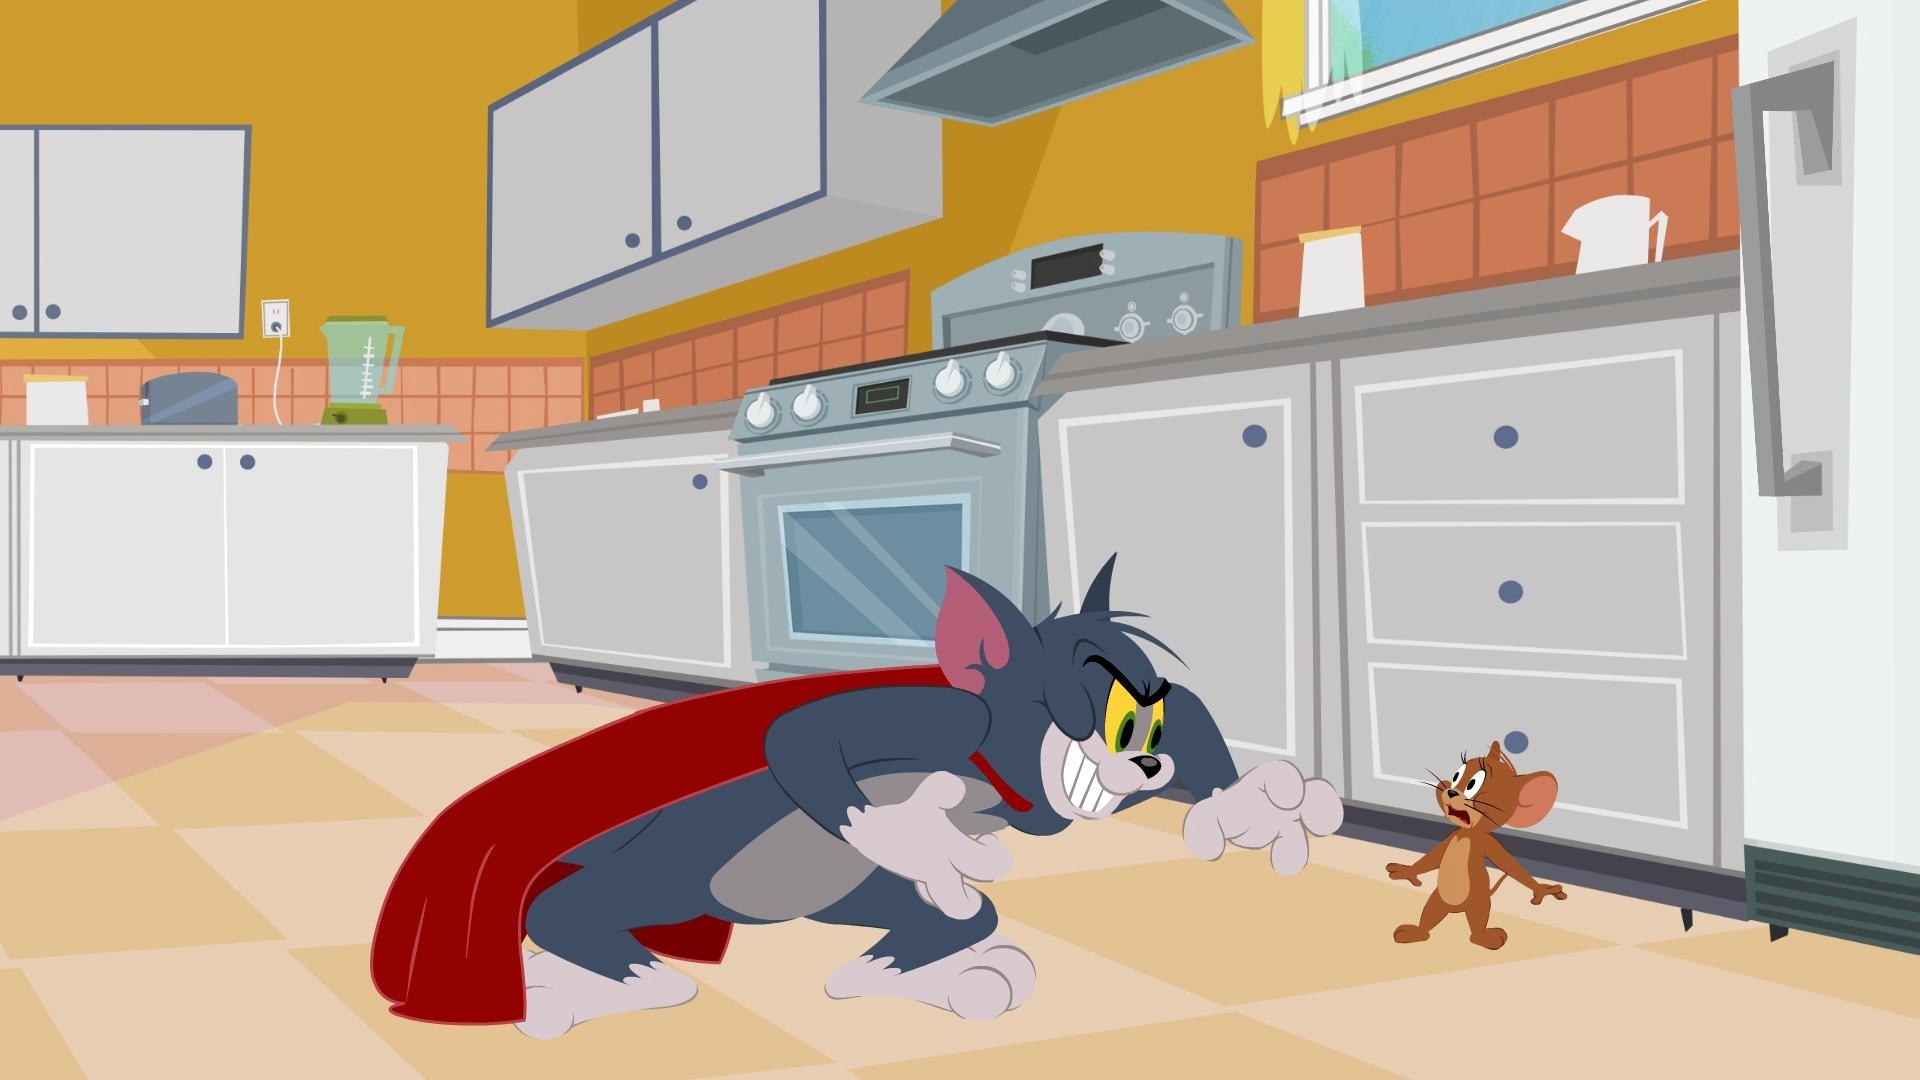 Tom and Jerry Animation, Tom and jerry show, 1920x1080 Full HD Desktop